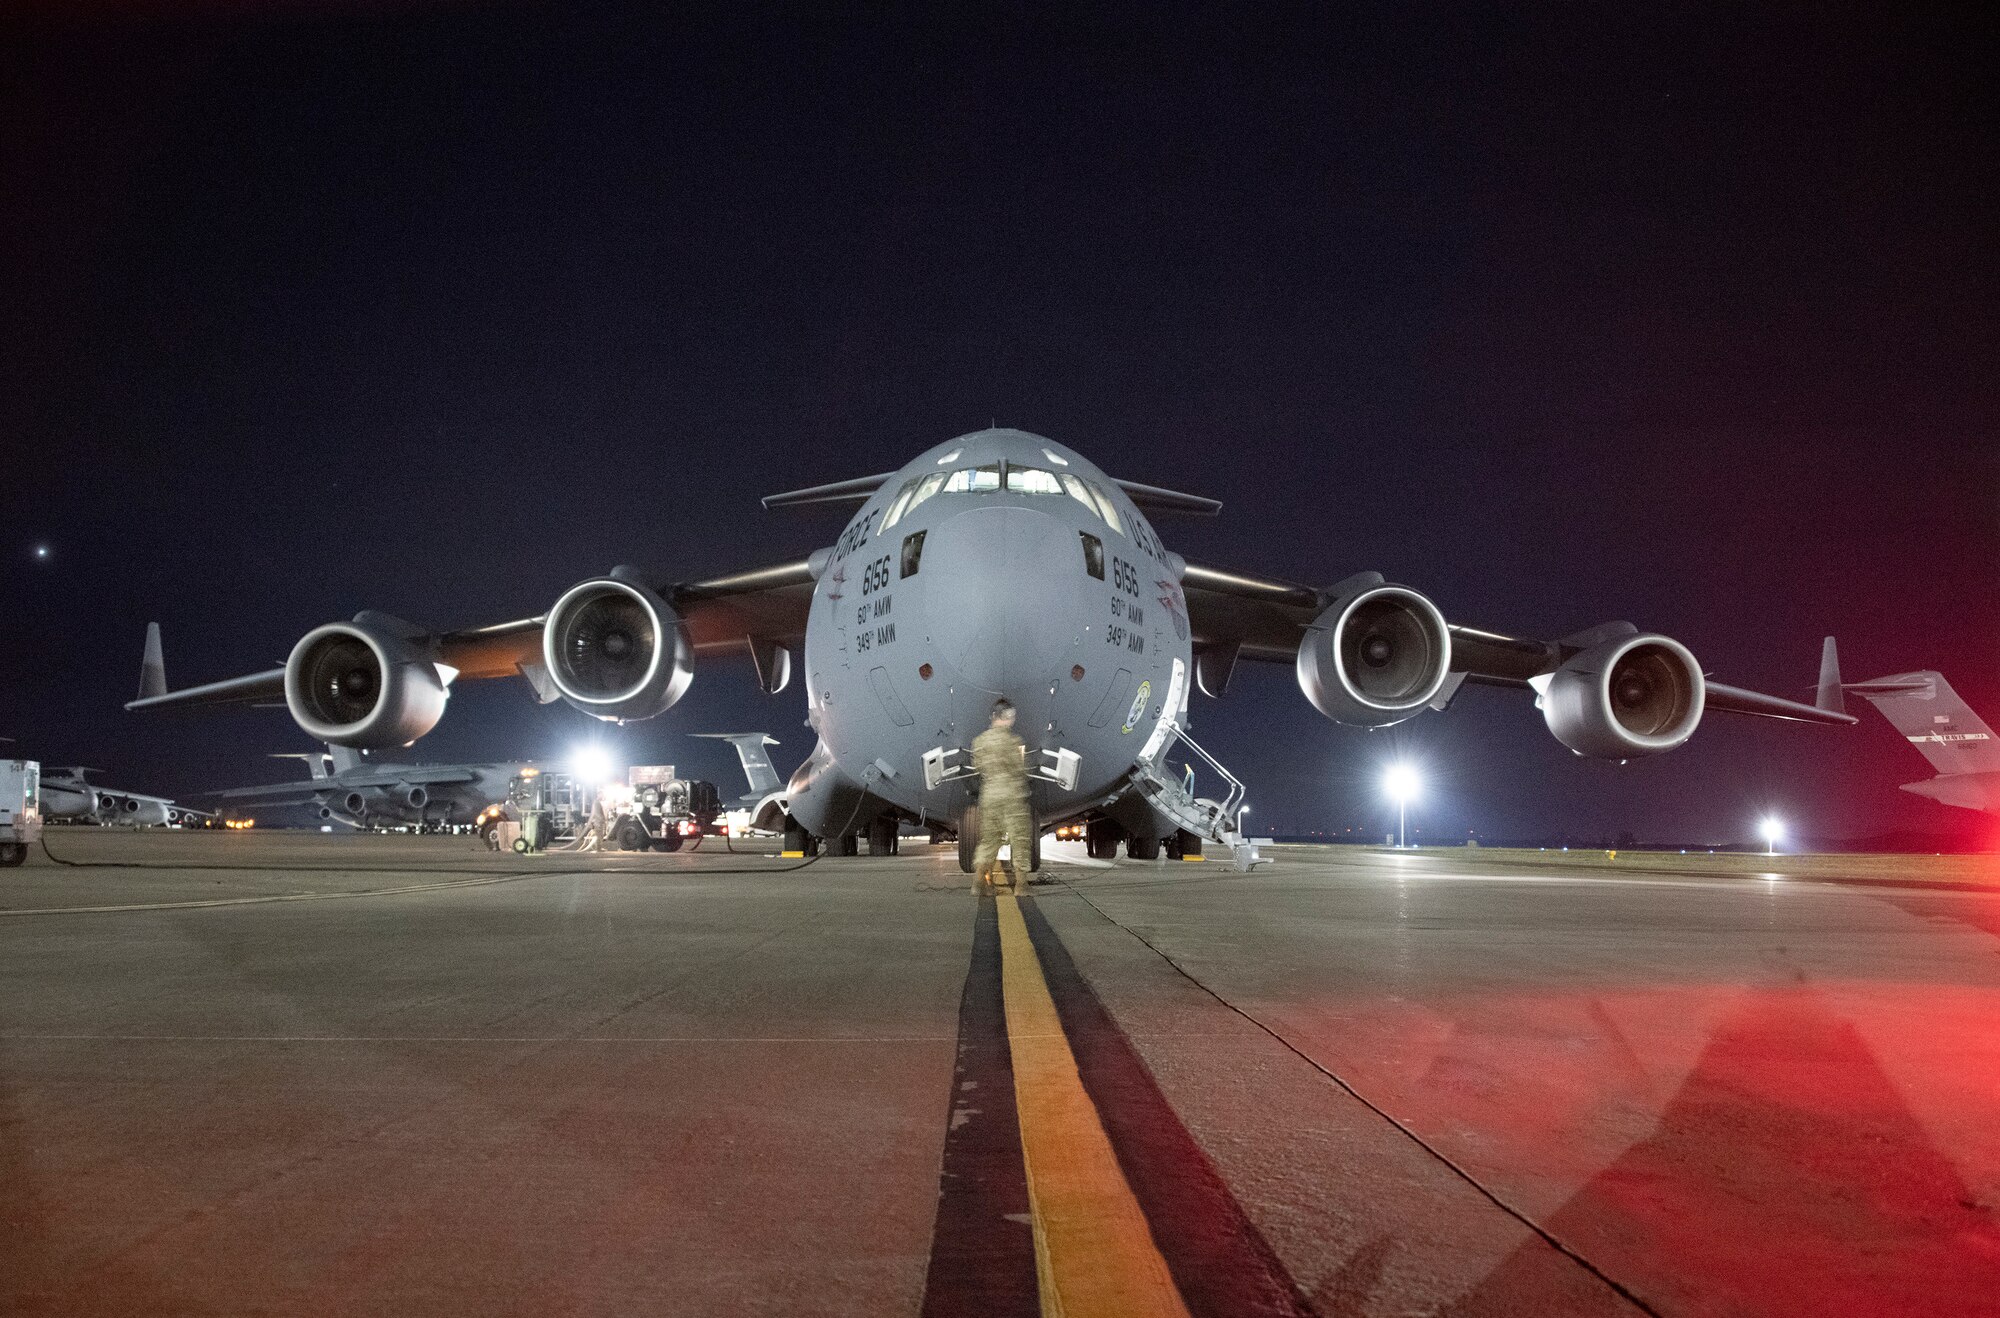 A U.S. Airman assigned to the 60th Air Mobility Wing is part of a pre-flight team servicing a C-17 Globemaster III prior to take off at Travis Air Force Base, California, April 10, 2022. Airmen from multiple squadrons participated in exercise Roundel Perun 22-01, testing the ability to employ rapid mobility capabilities during possible real-world scenarios. (U.S. Air Force photo by Heide Couch)